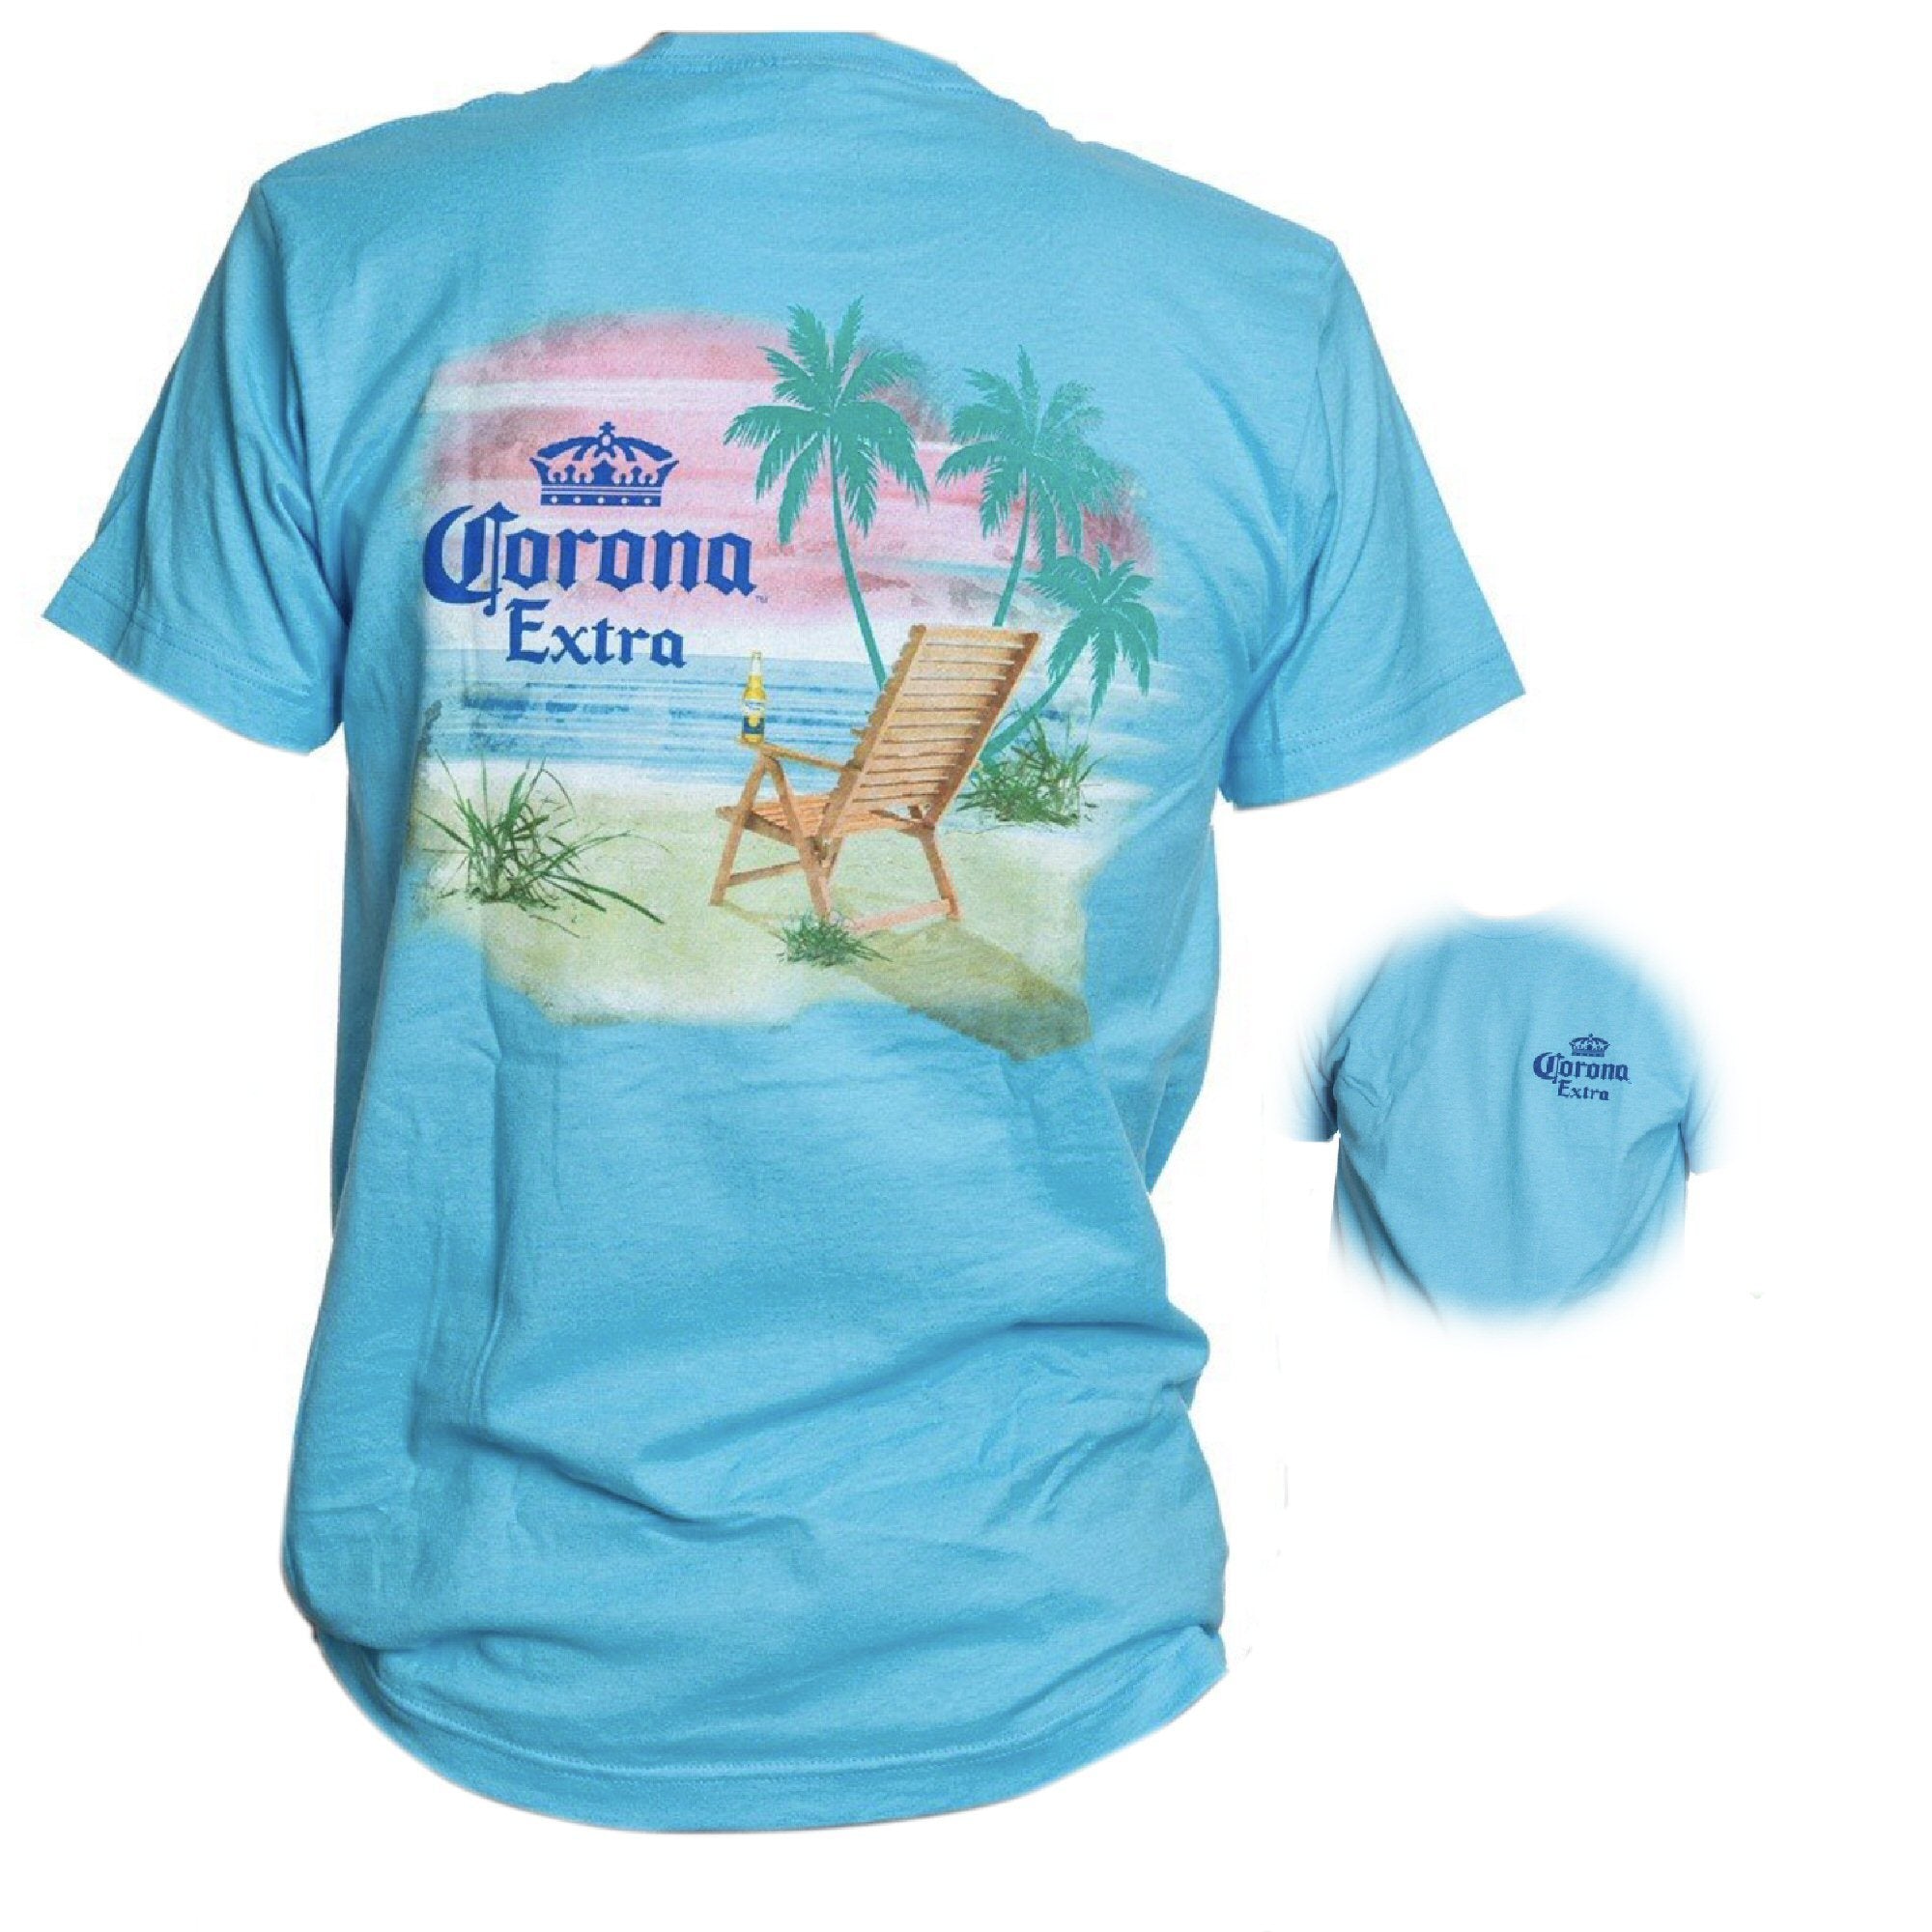 Officially Licensed Corona Extra Men's Short Sleeved Tee - Turquoise